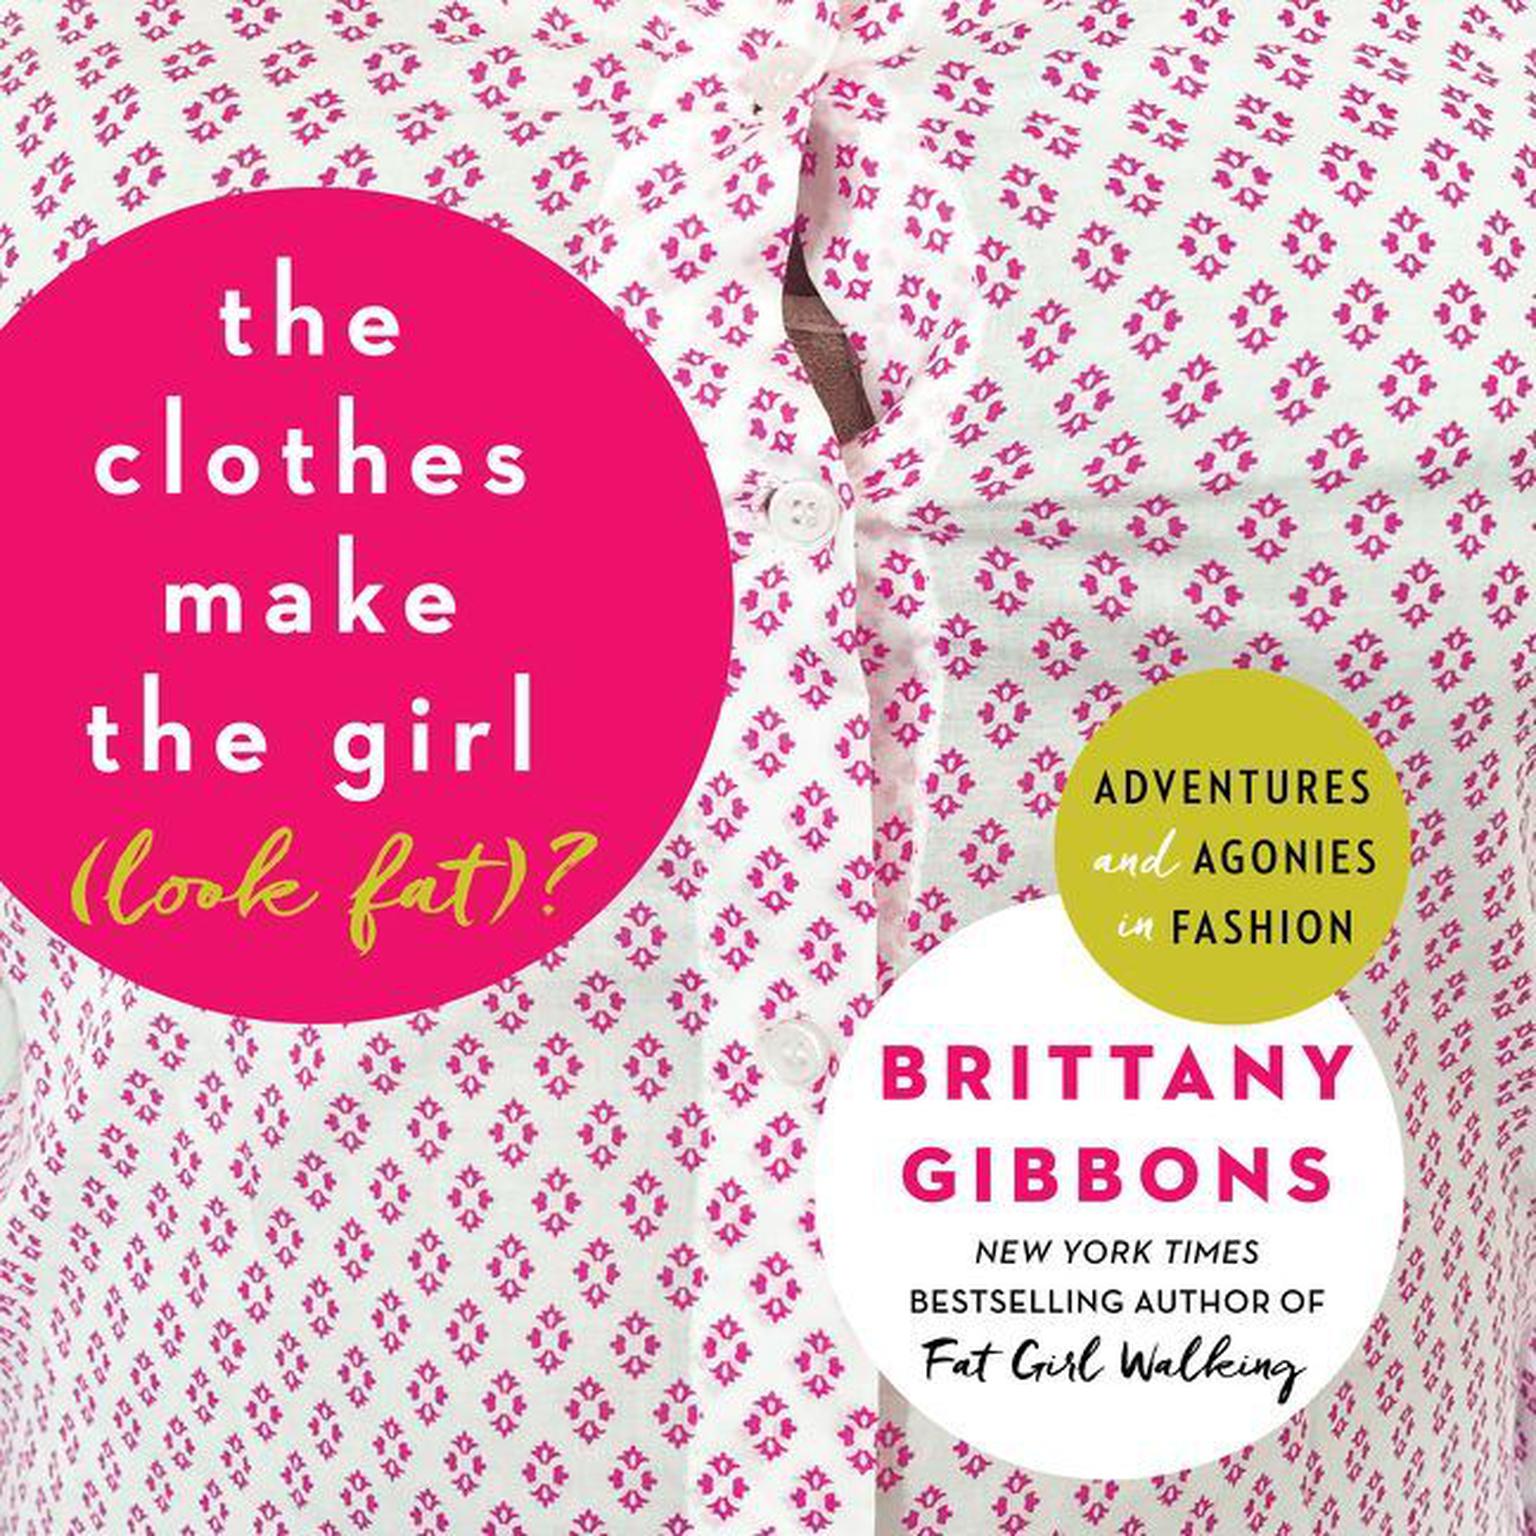 The Clothes Make the Girl (Look Fat)?: Adventures and Agonies in Fashion Audiobook, by Brittany Gibbons